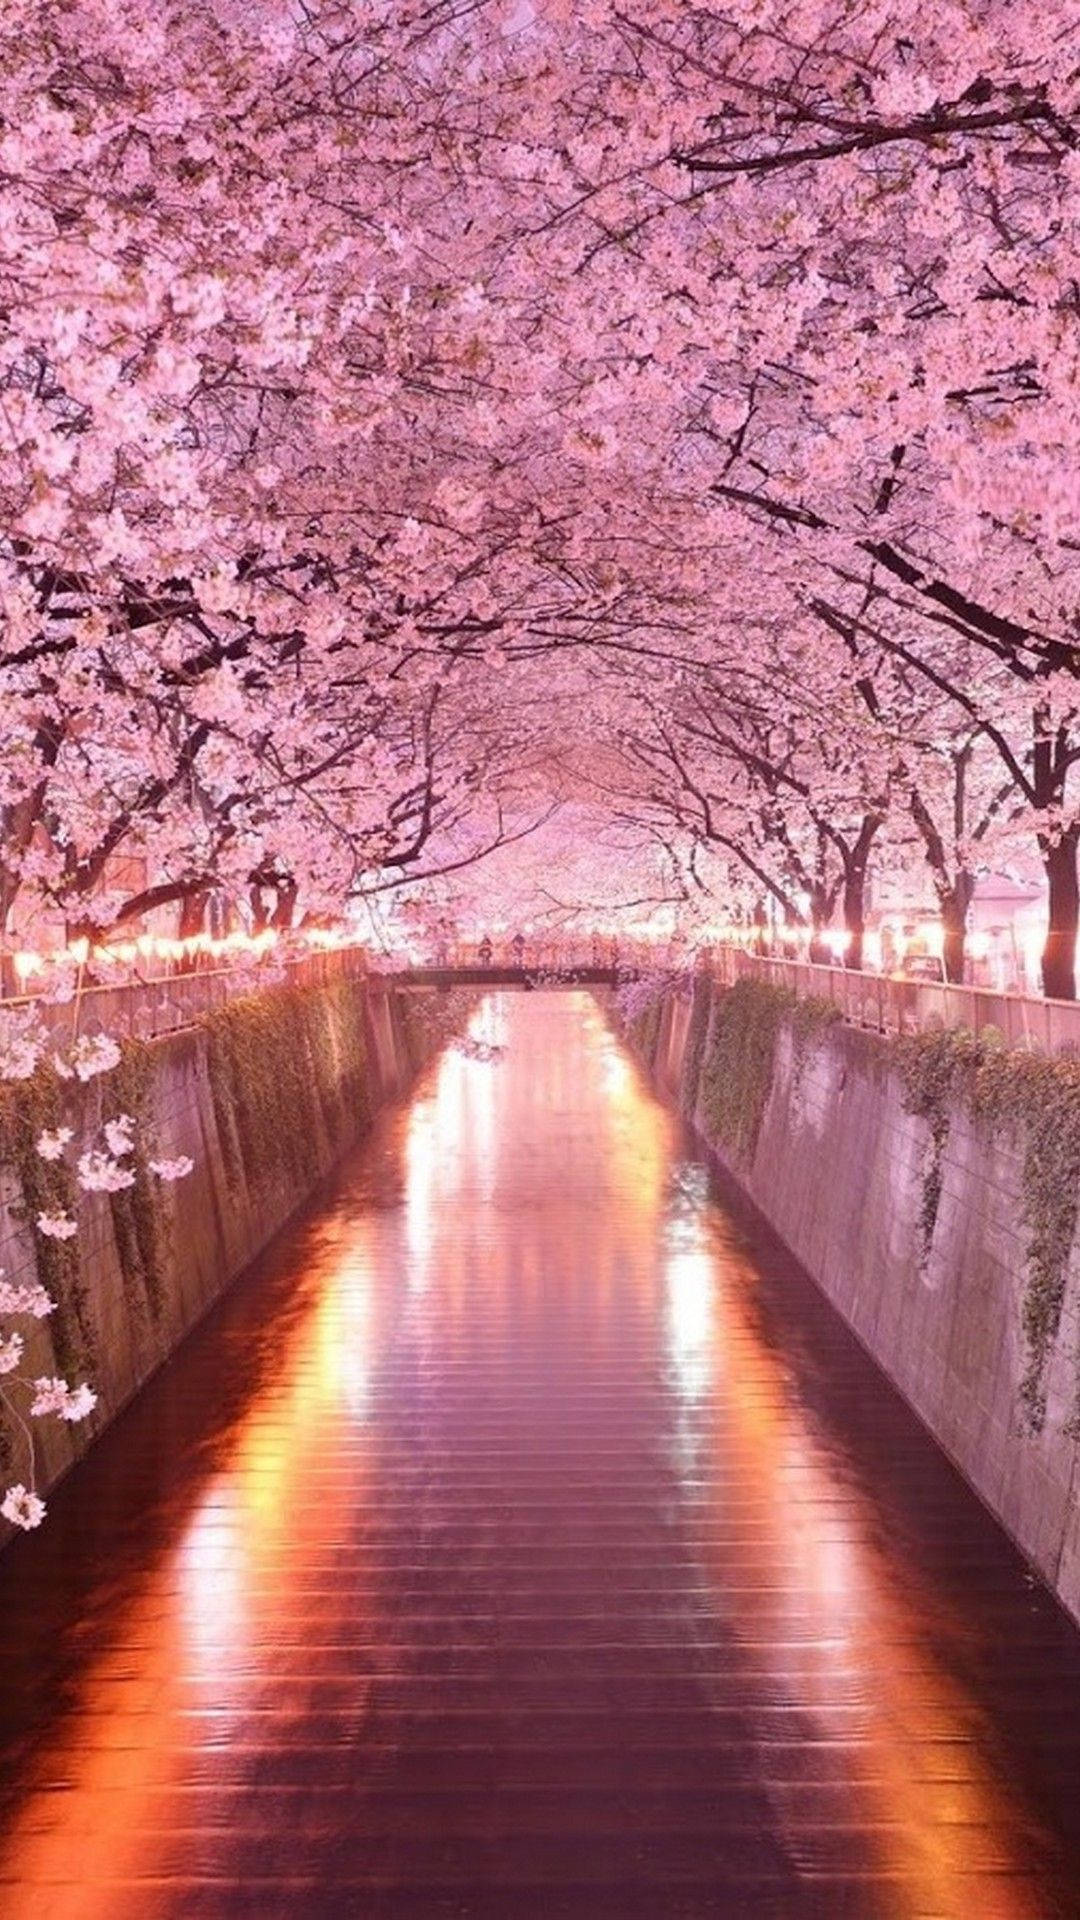 Enjoy the Japanese sakura trees under the arch on your iPhone Wallpaper